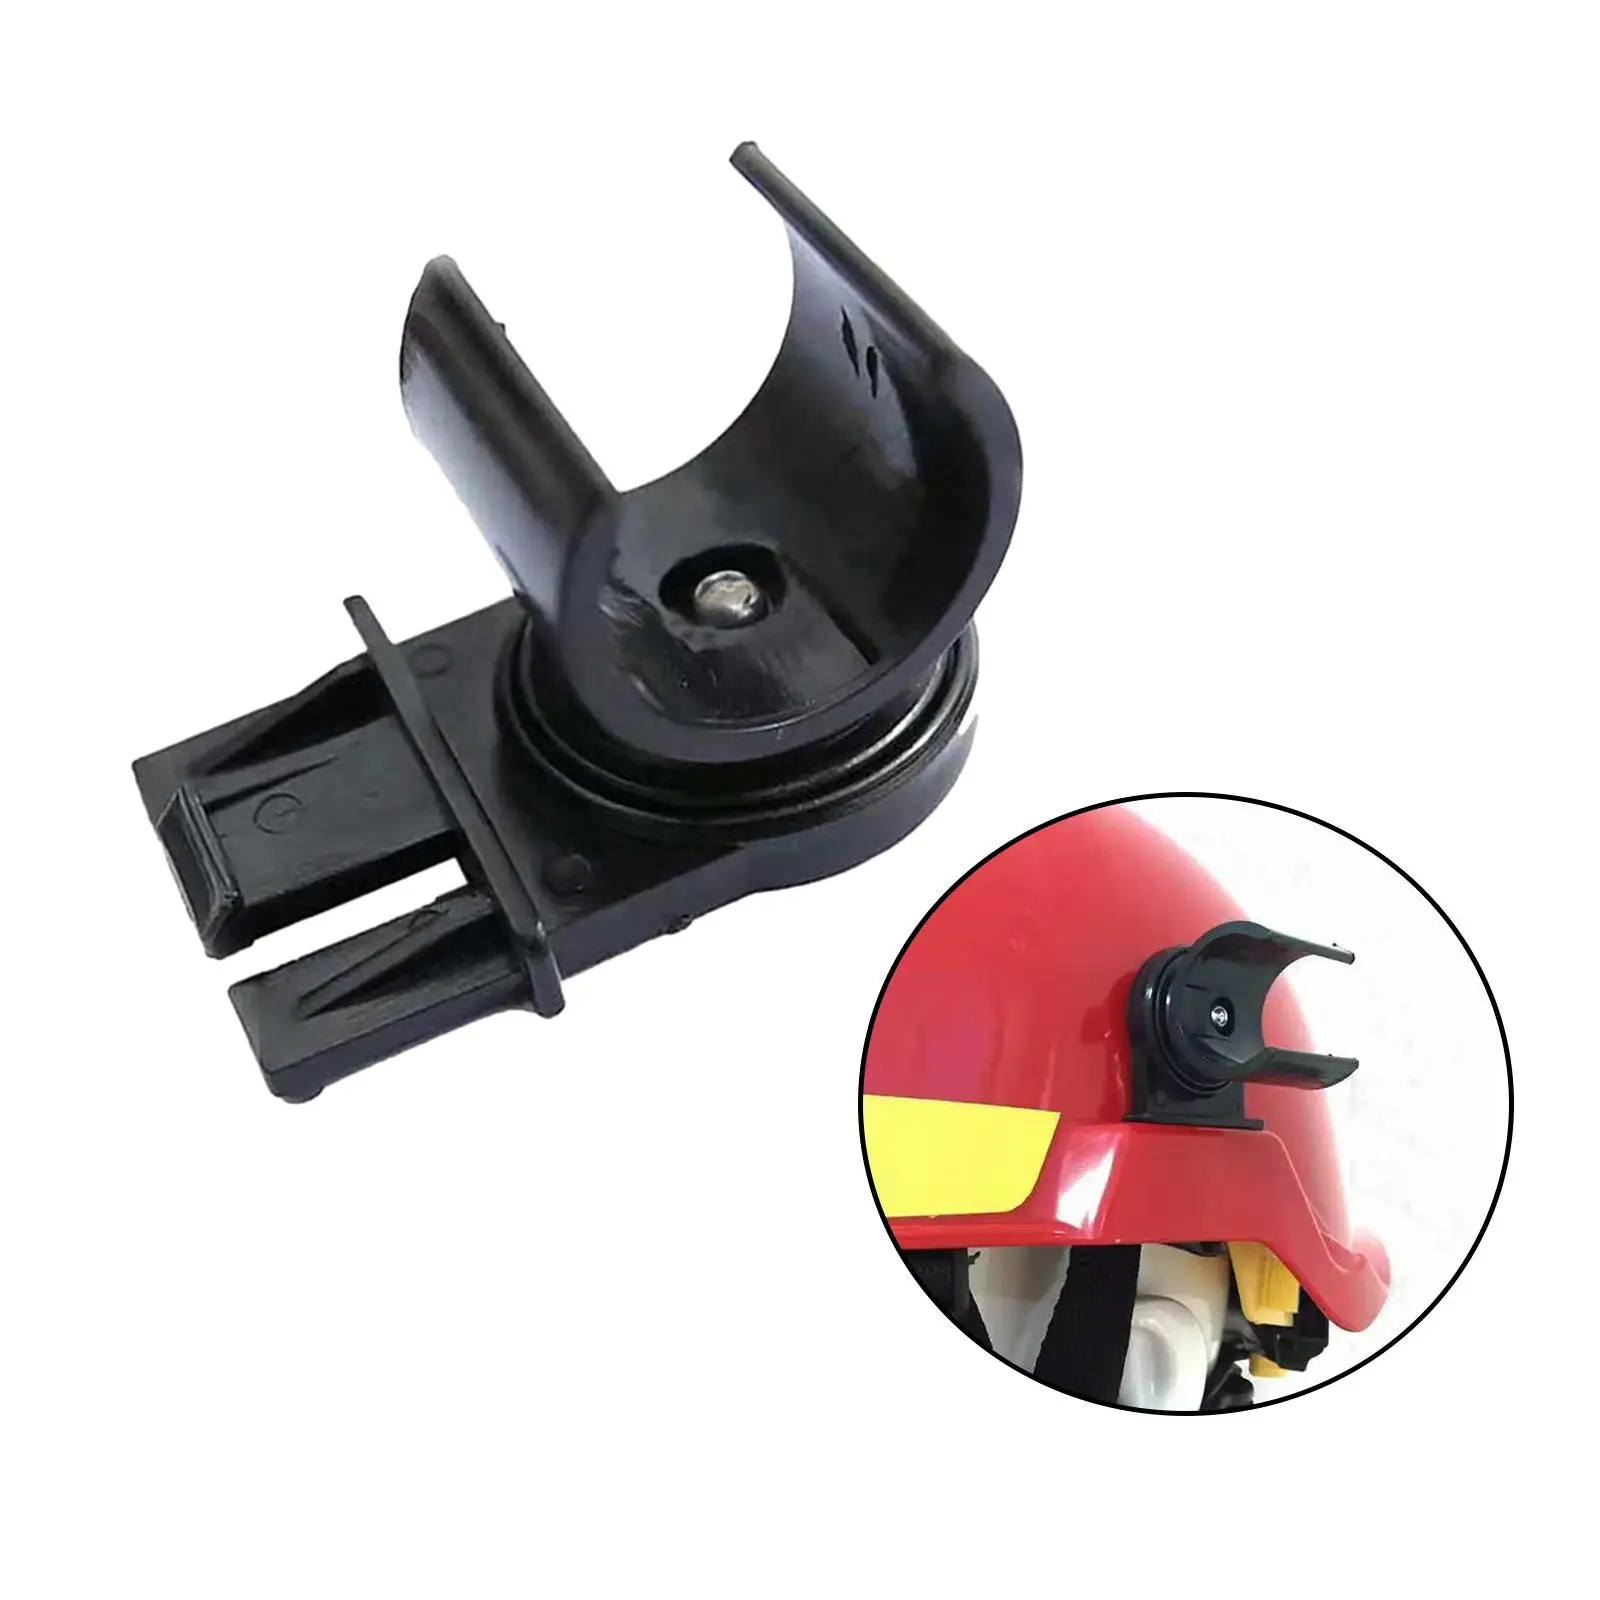 Hardhat Flashlight Holder Headlights Holder Clamp Plastic for Outdoor Cycling Construction Workers Night Riding Outdoor Work